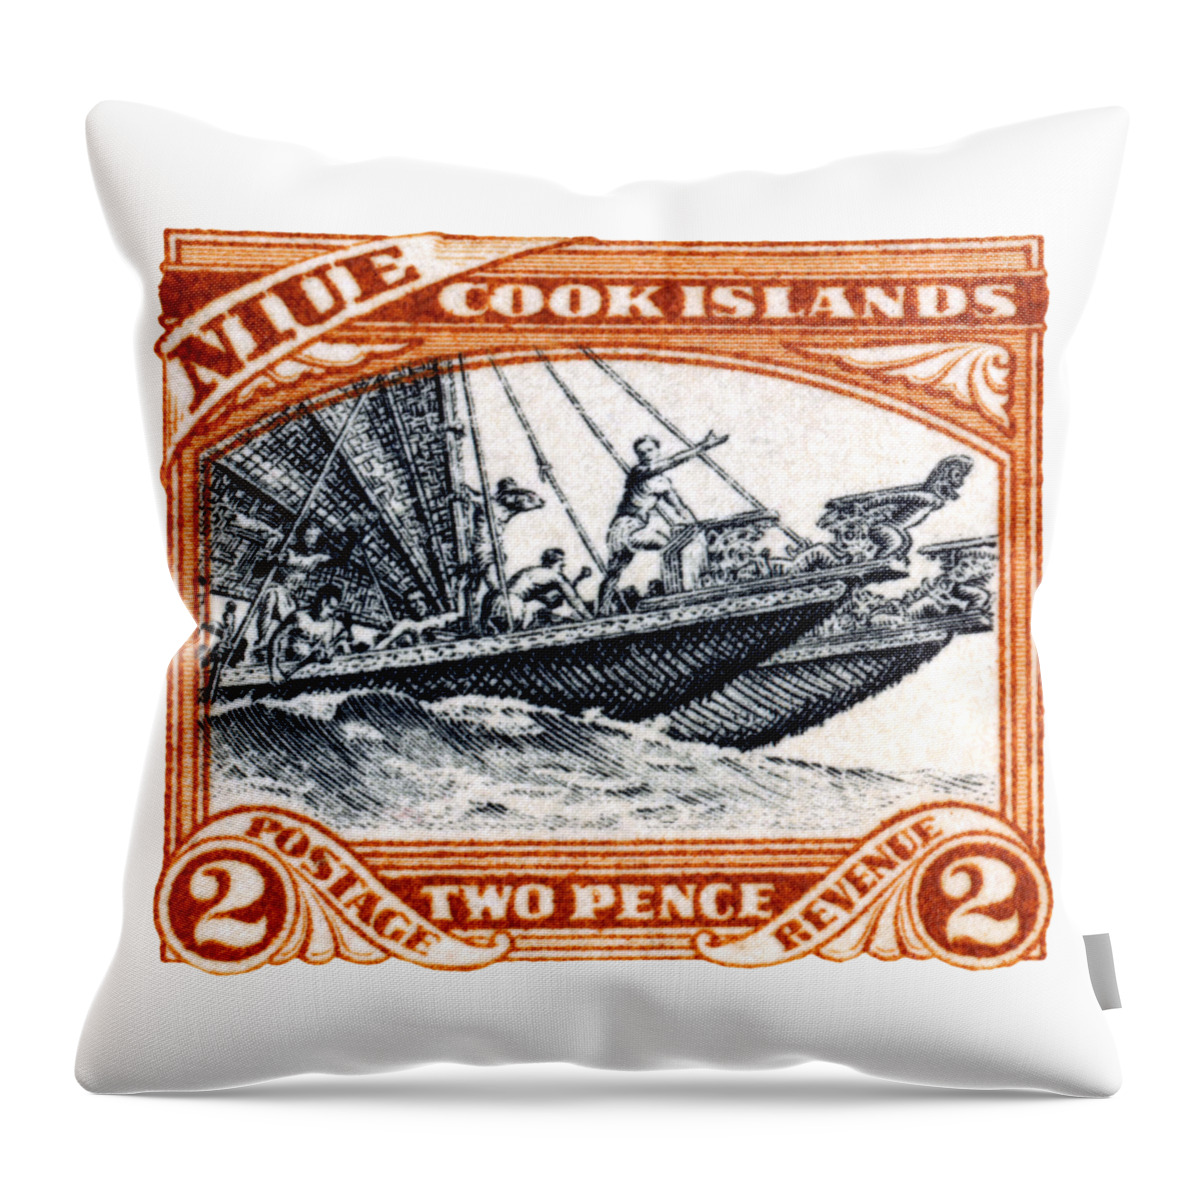 Niue Island Throw Pillow featuring the painting 1932 Niue Island Stamp by Historic Image